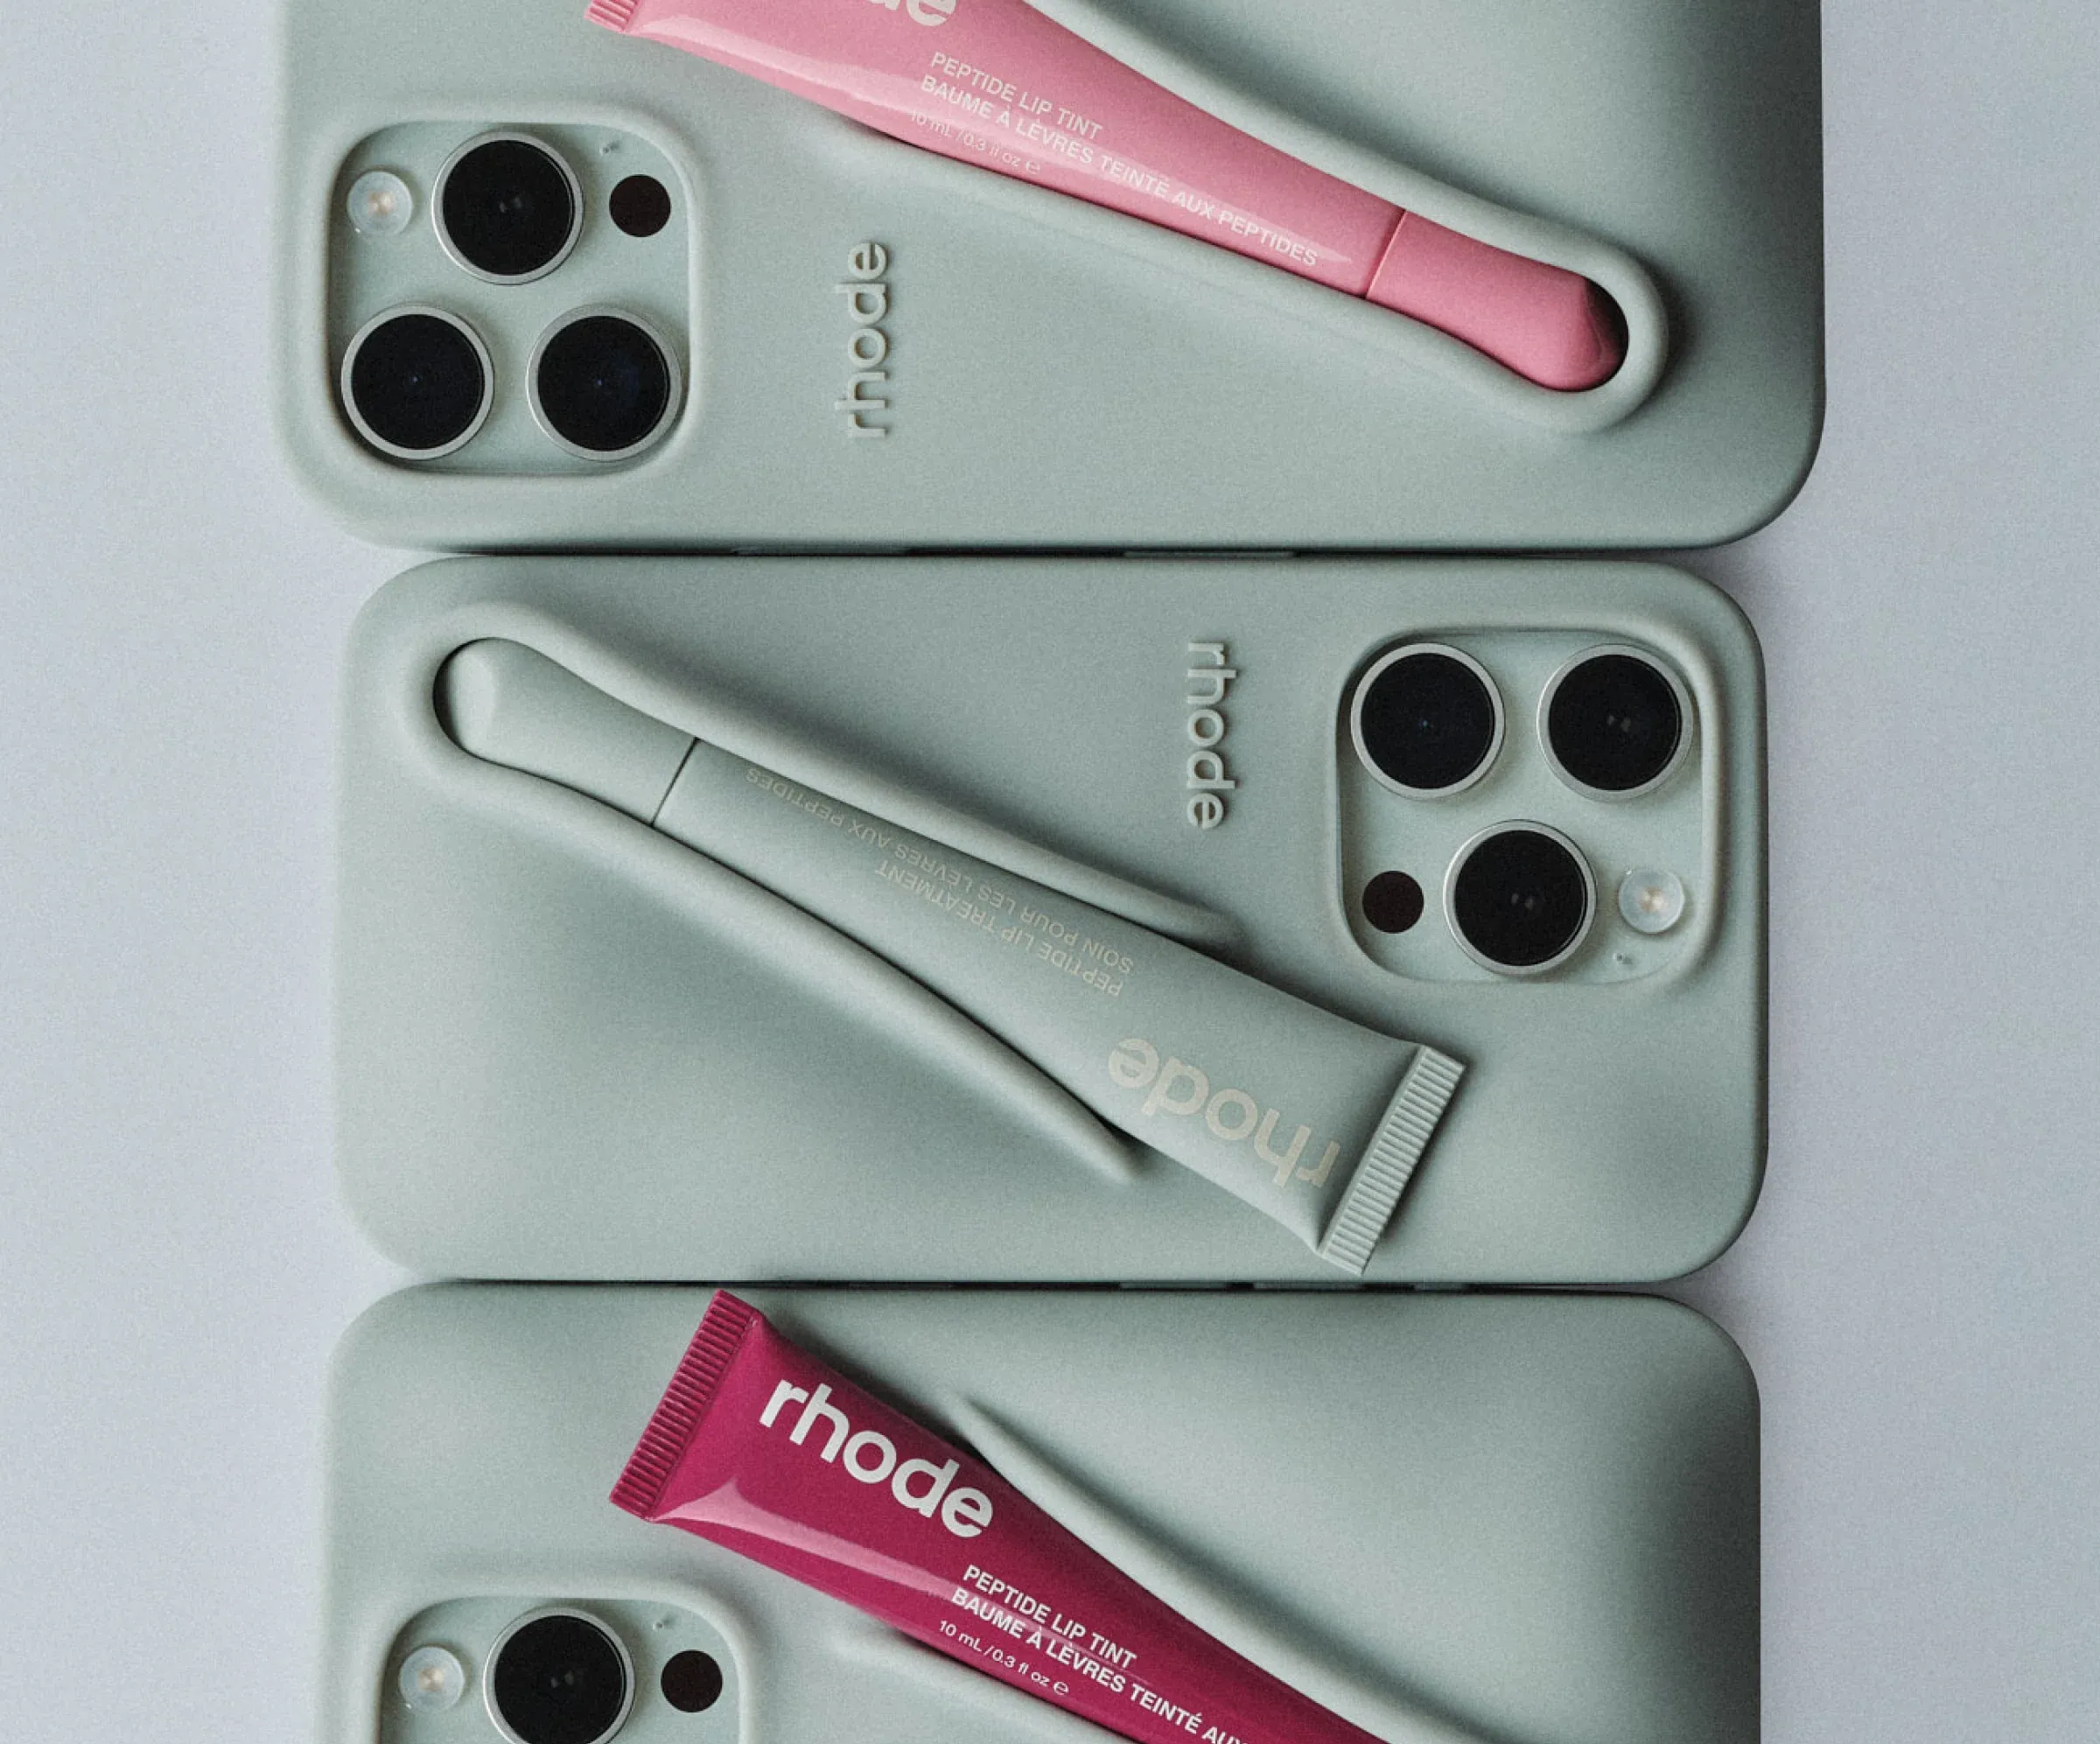 New phone cases from Rhode Skin